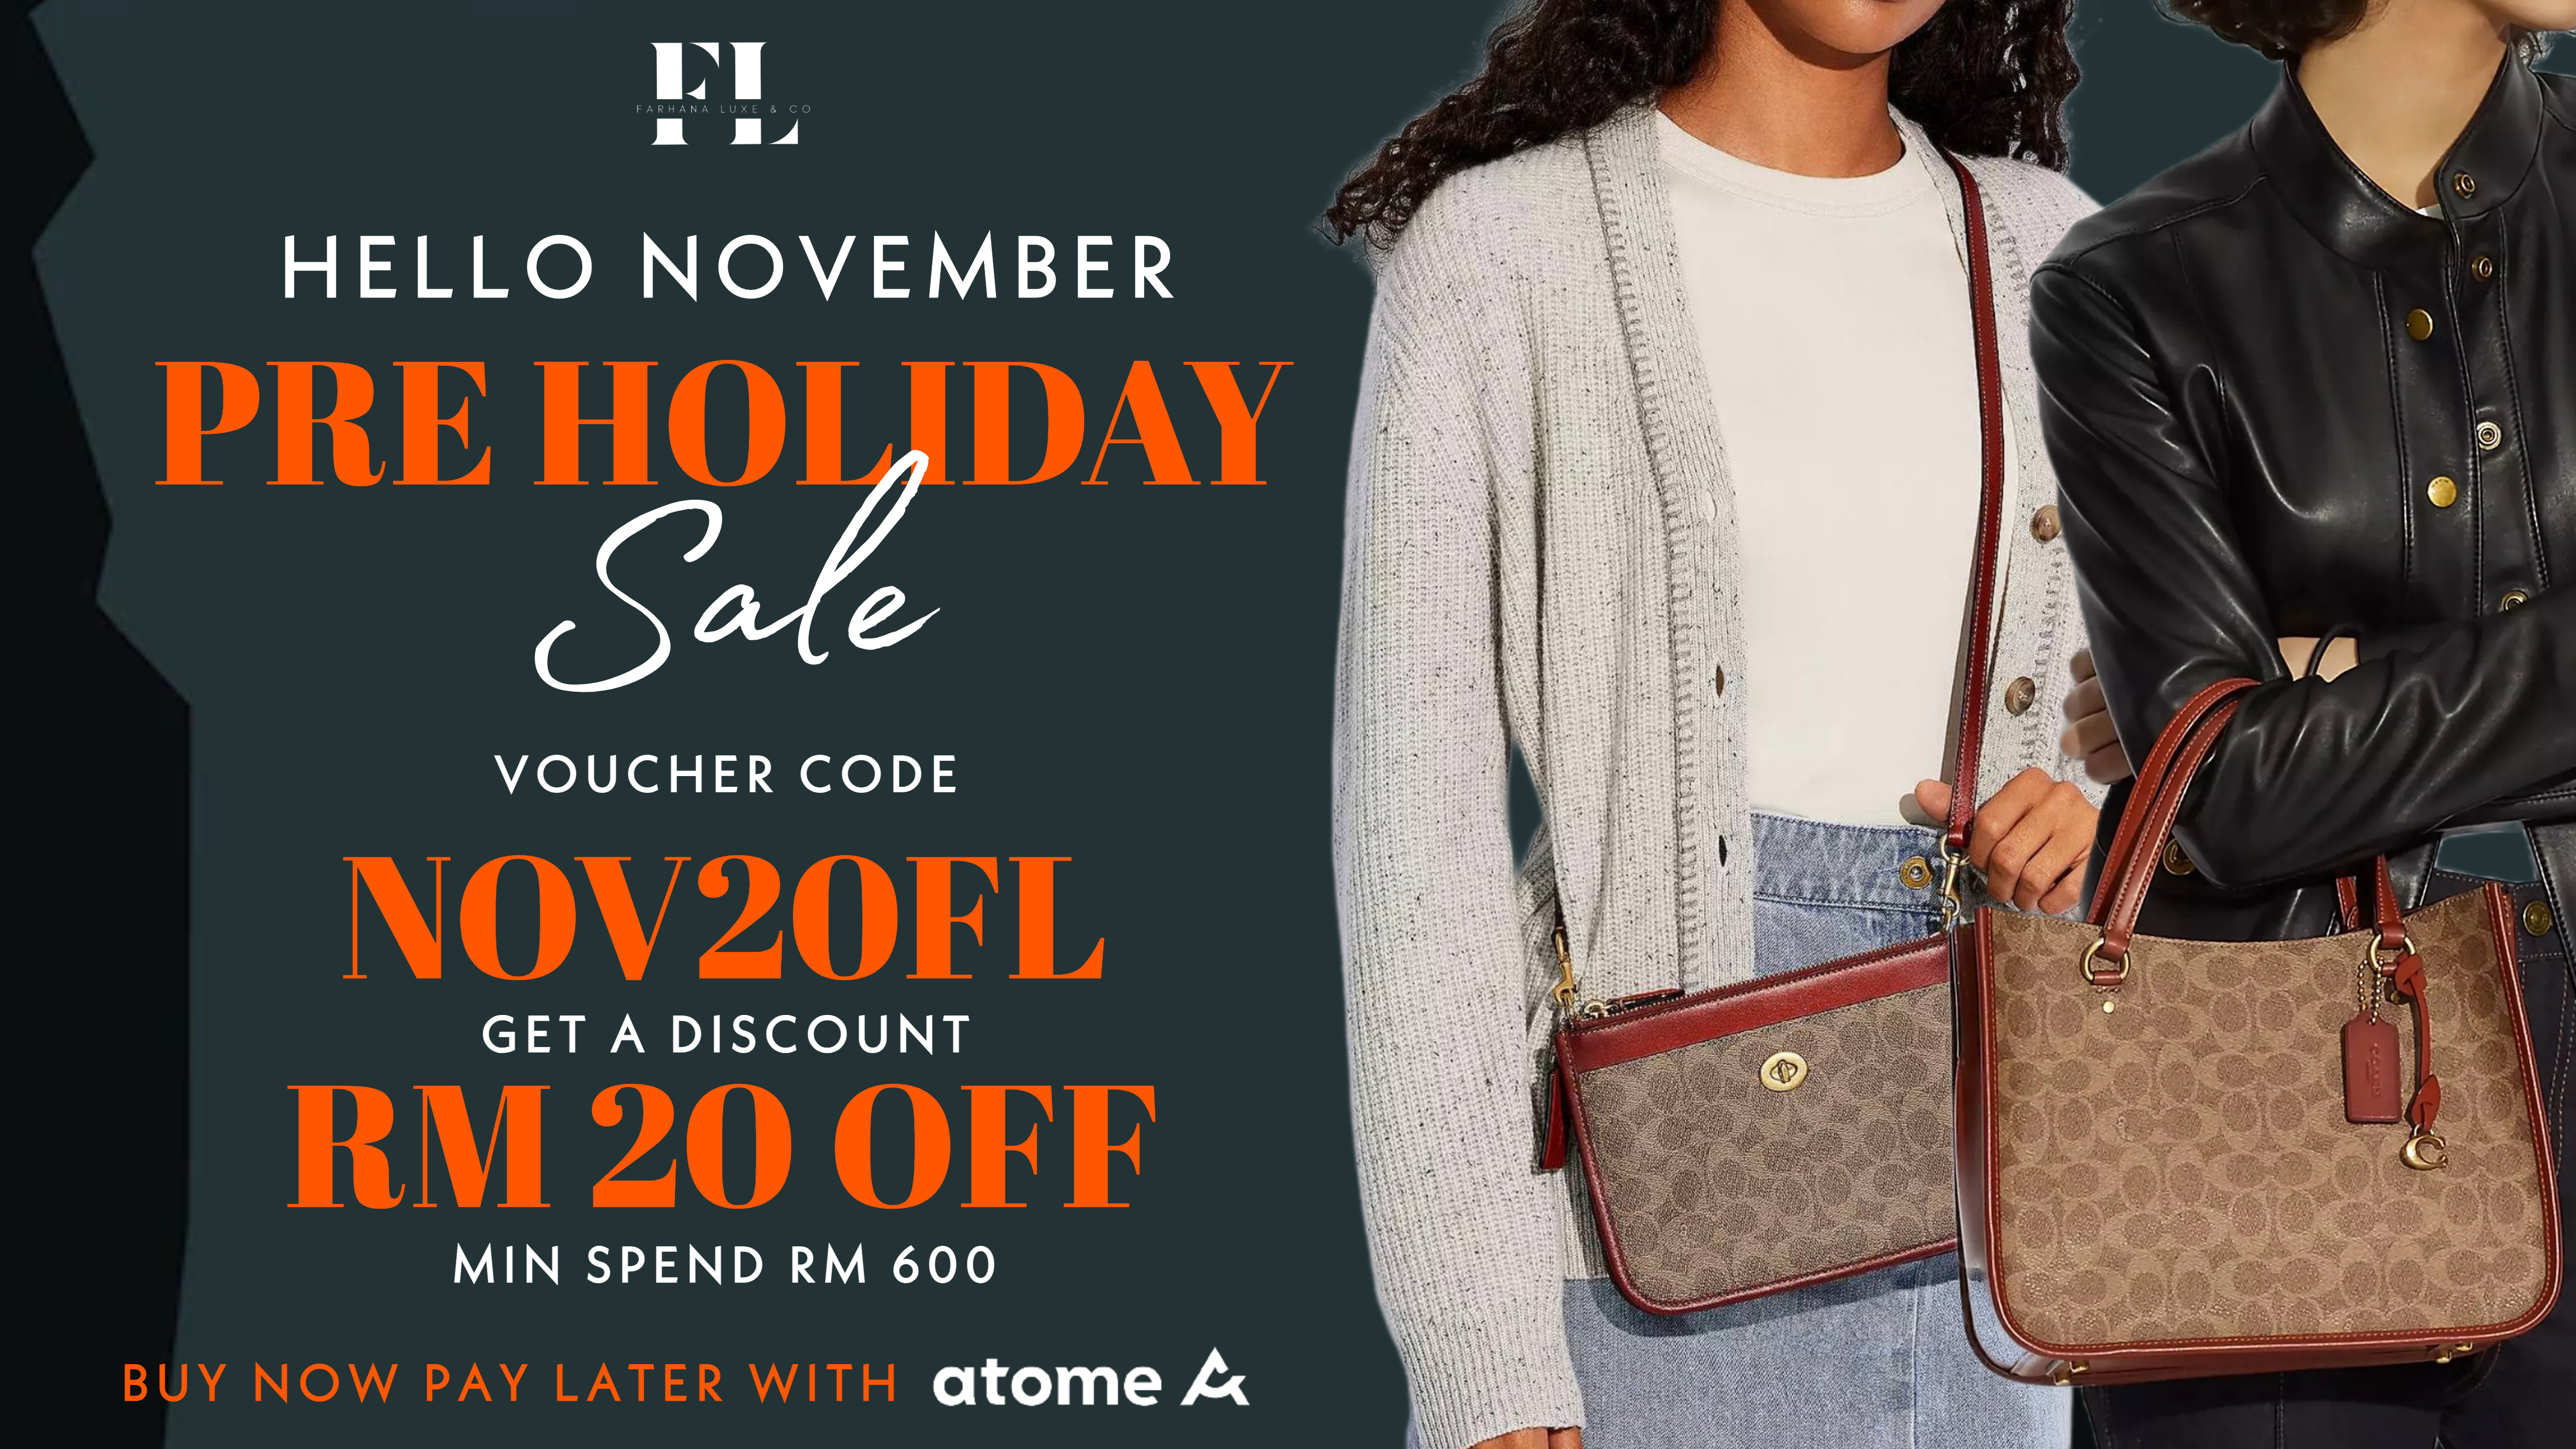 All Blogs about Louis Vuitton - Buy Now Pay Later with Atome App